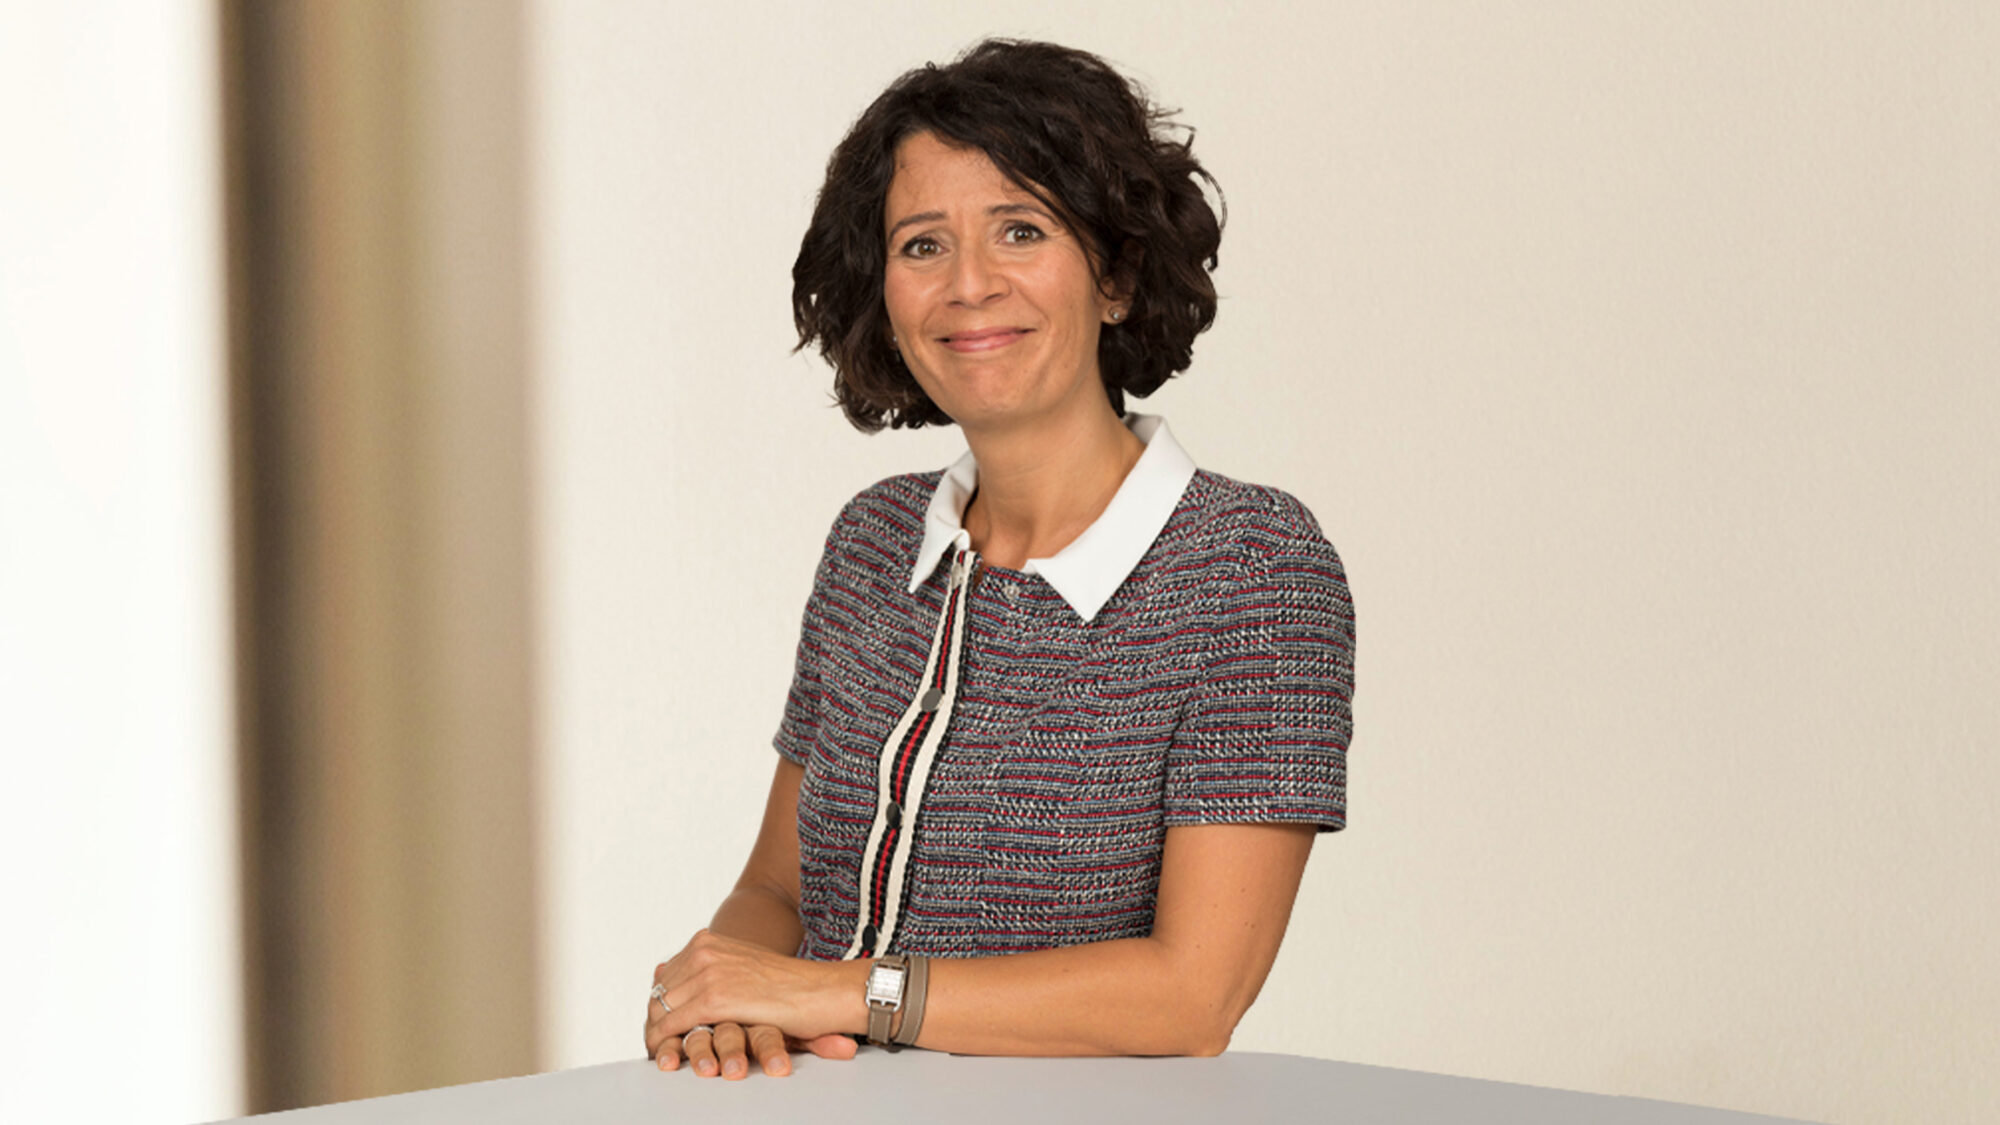 2022 - Claire Fanget appointed VP Human Resources of Renault brand